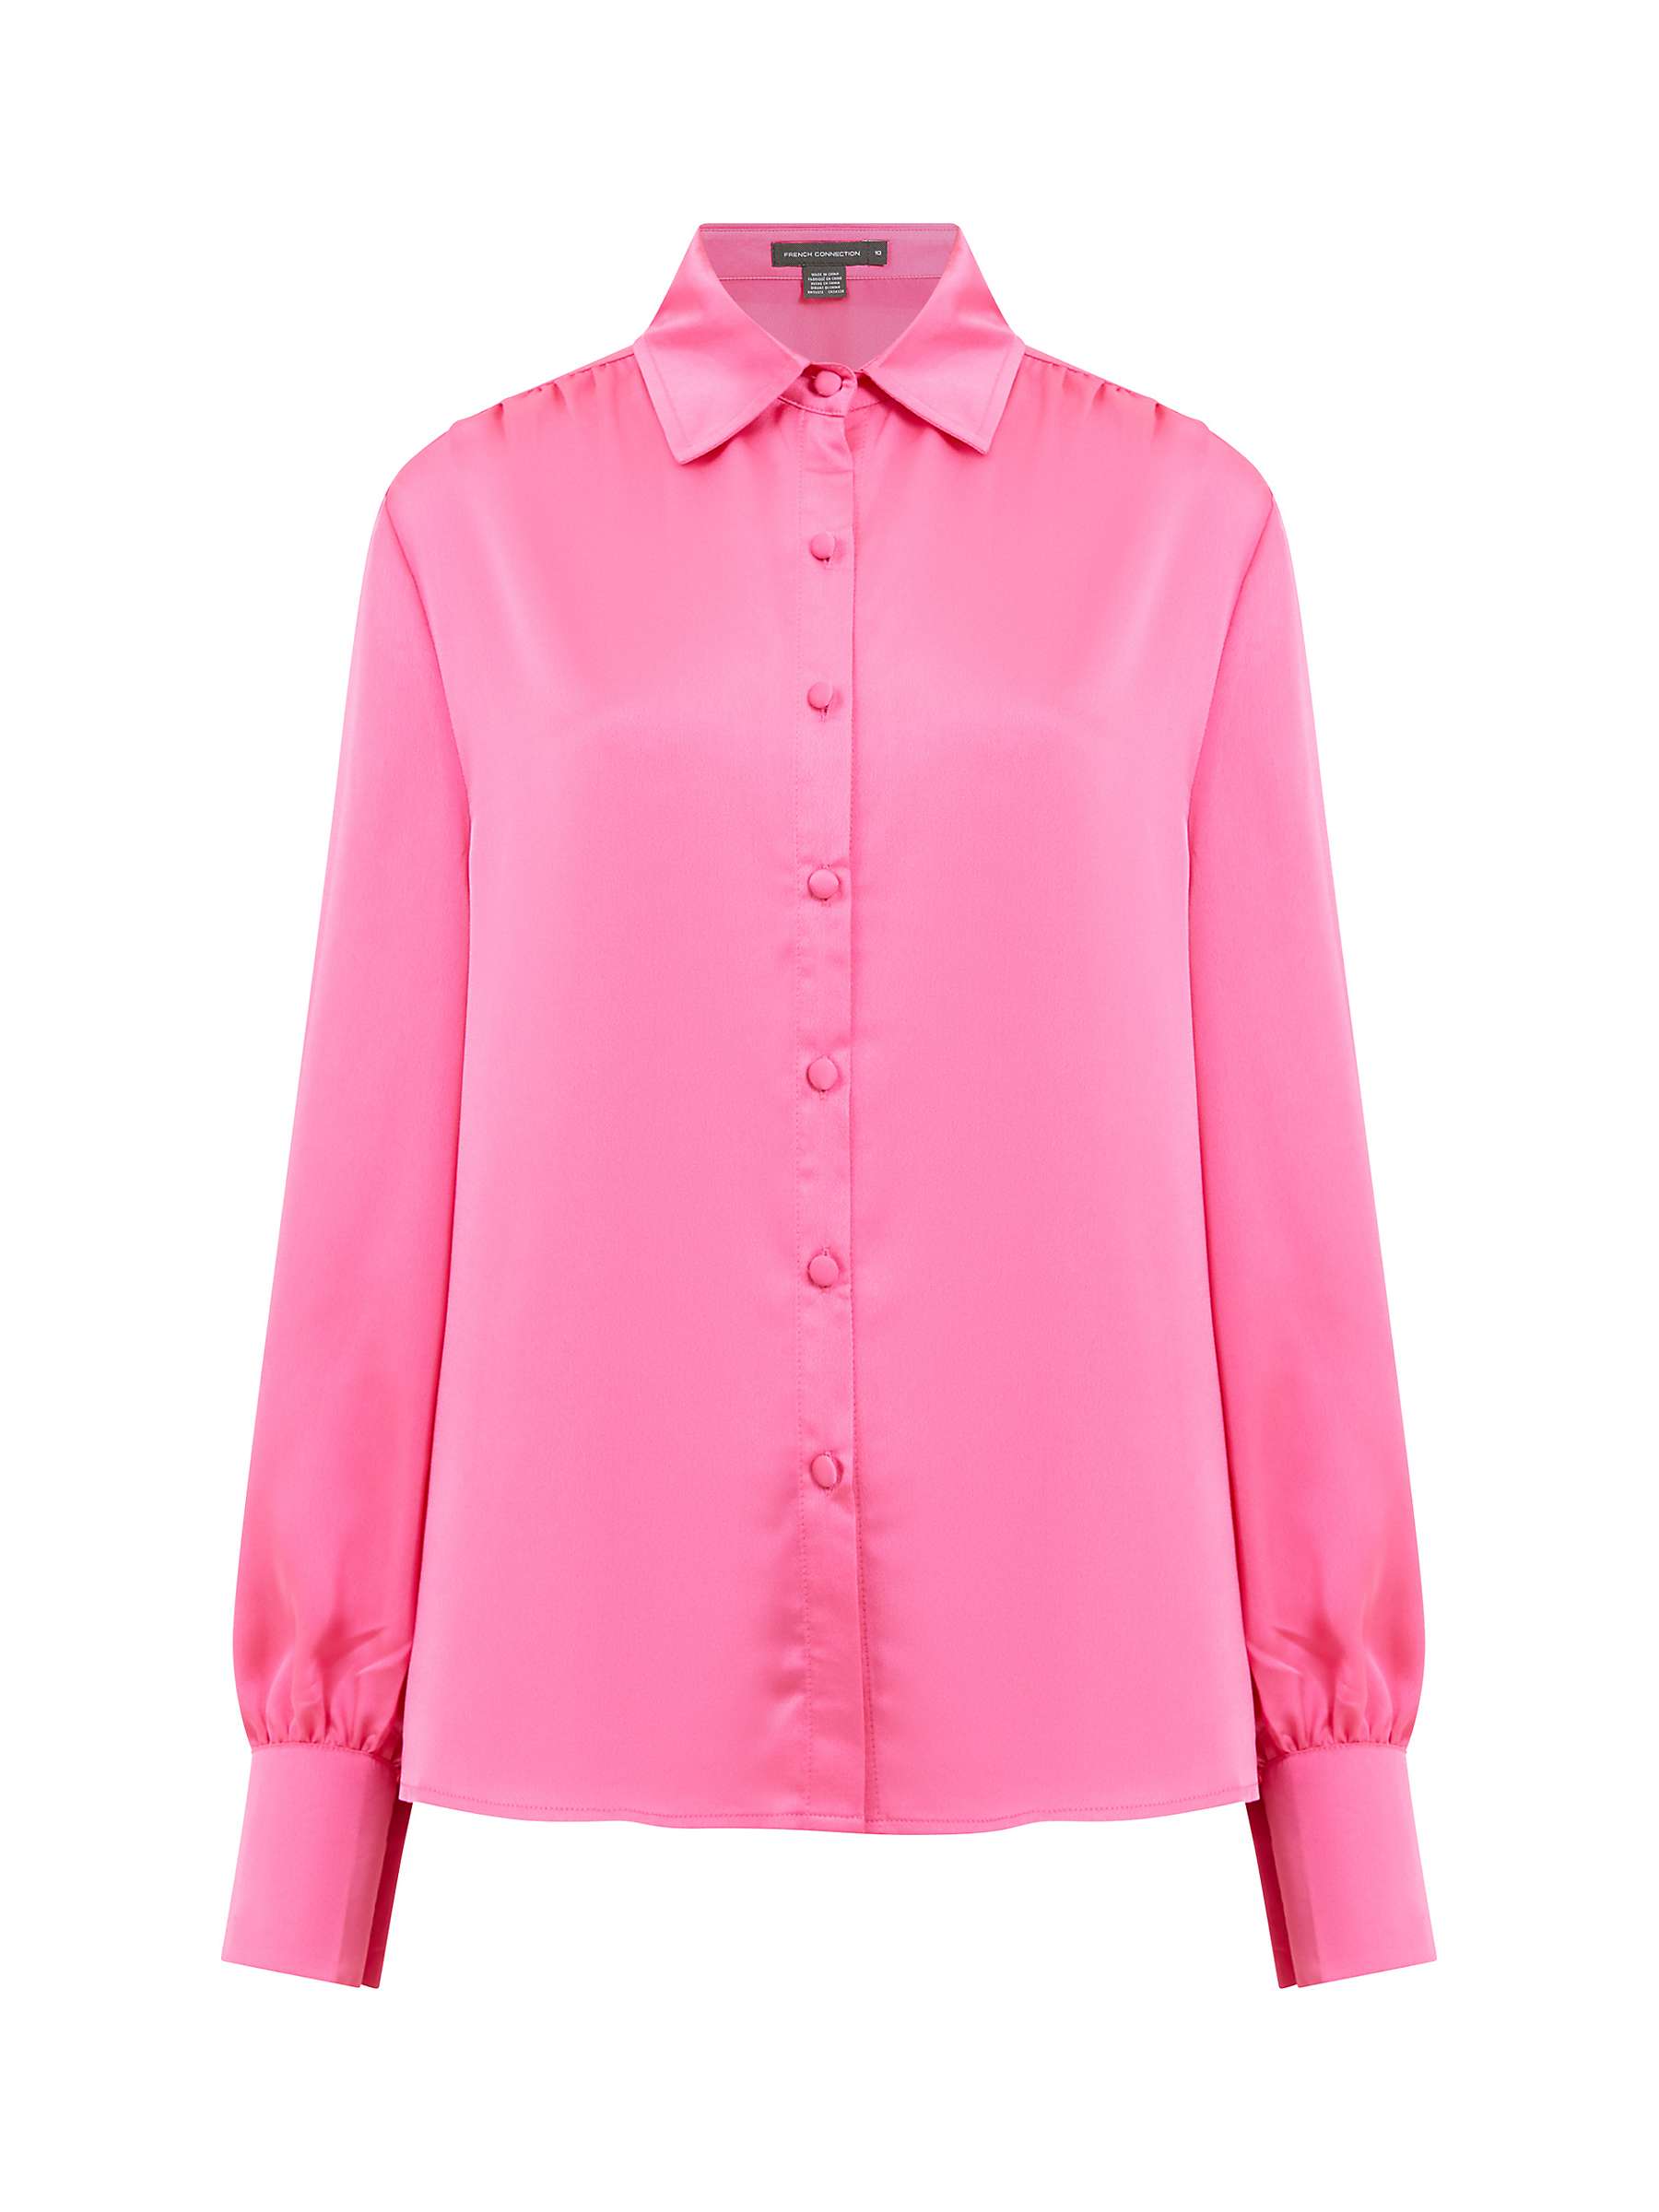 French Connection Satin Shirt, Lipstick at John Lewis & Partners